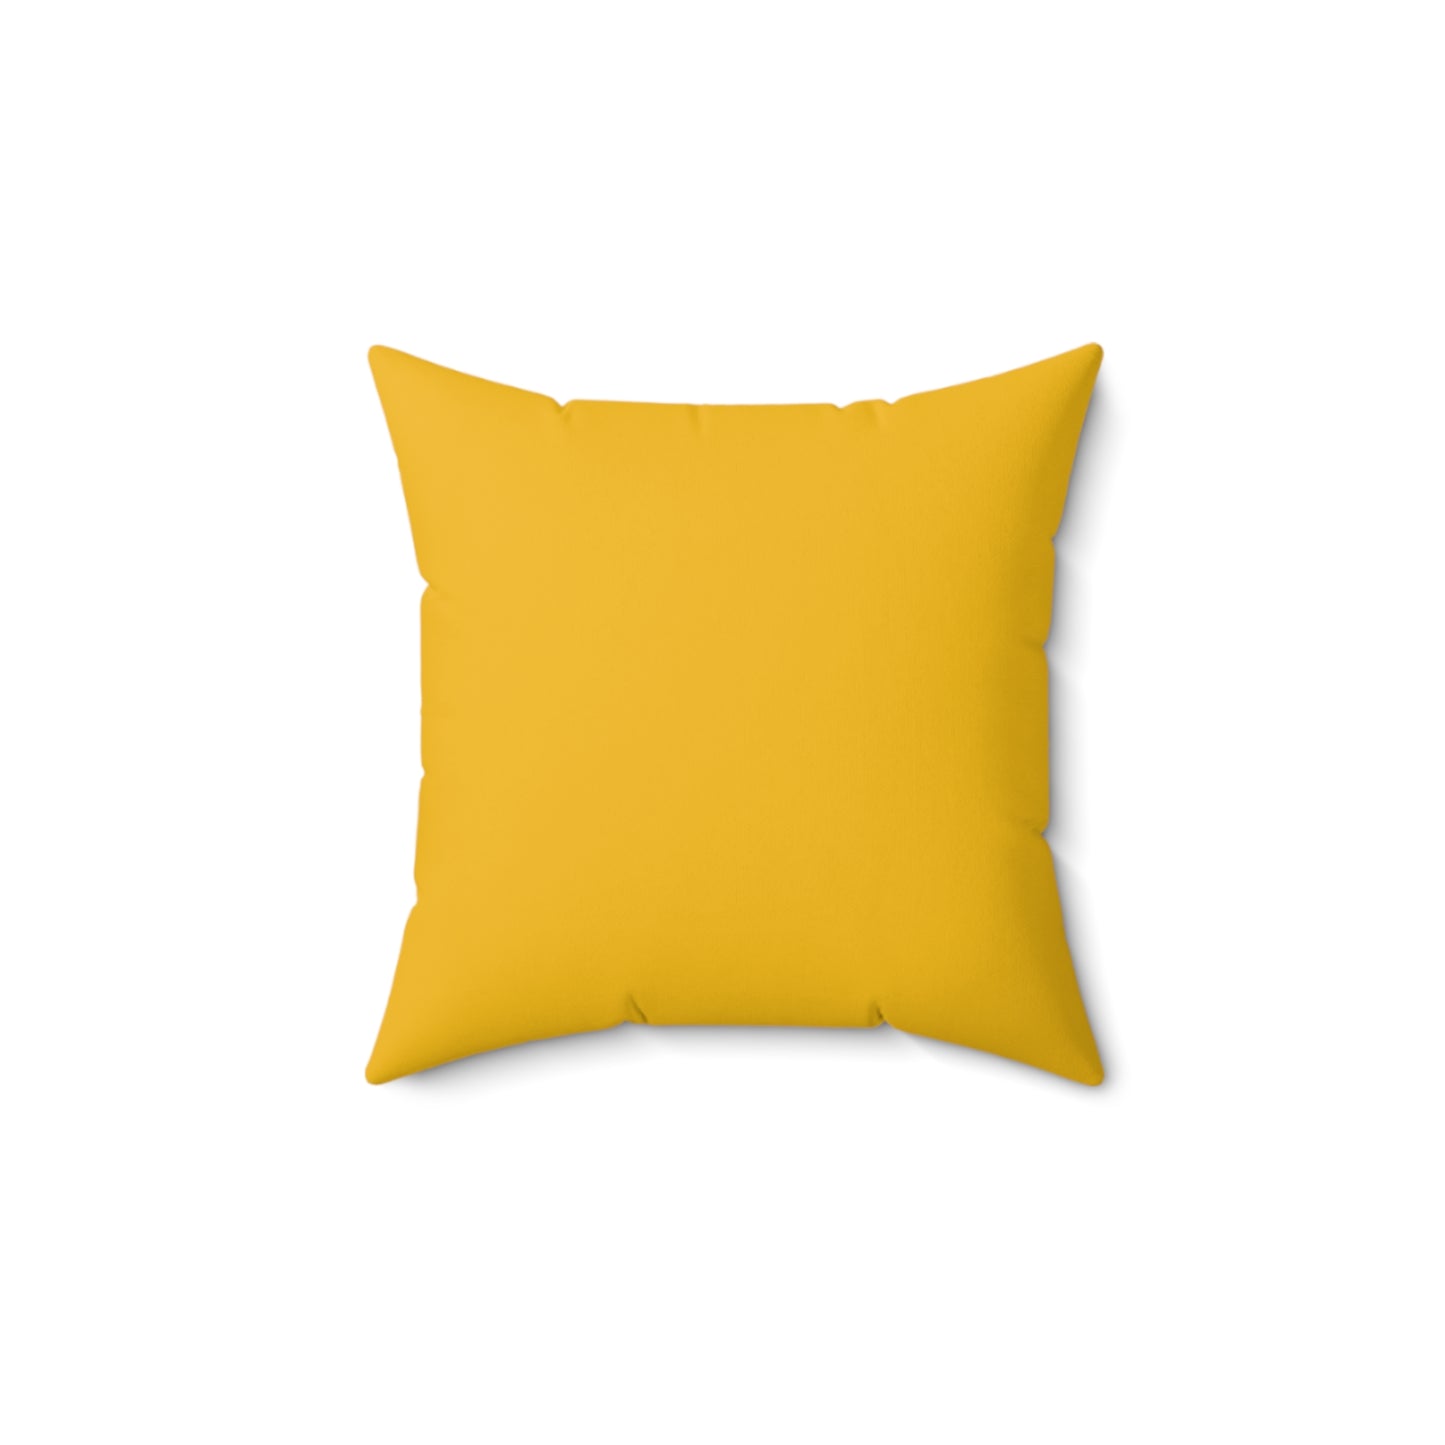 Magical/ Polyester Square Pillow